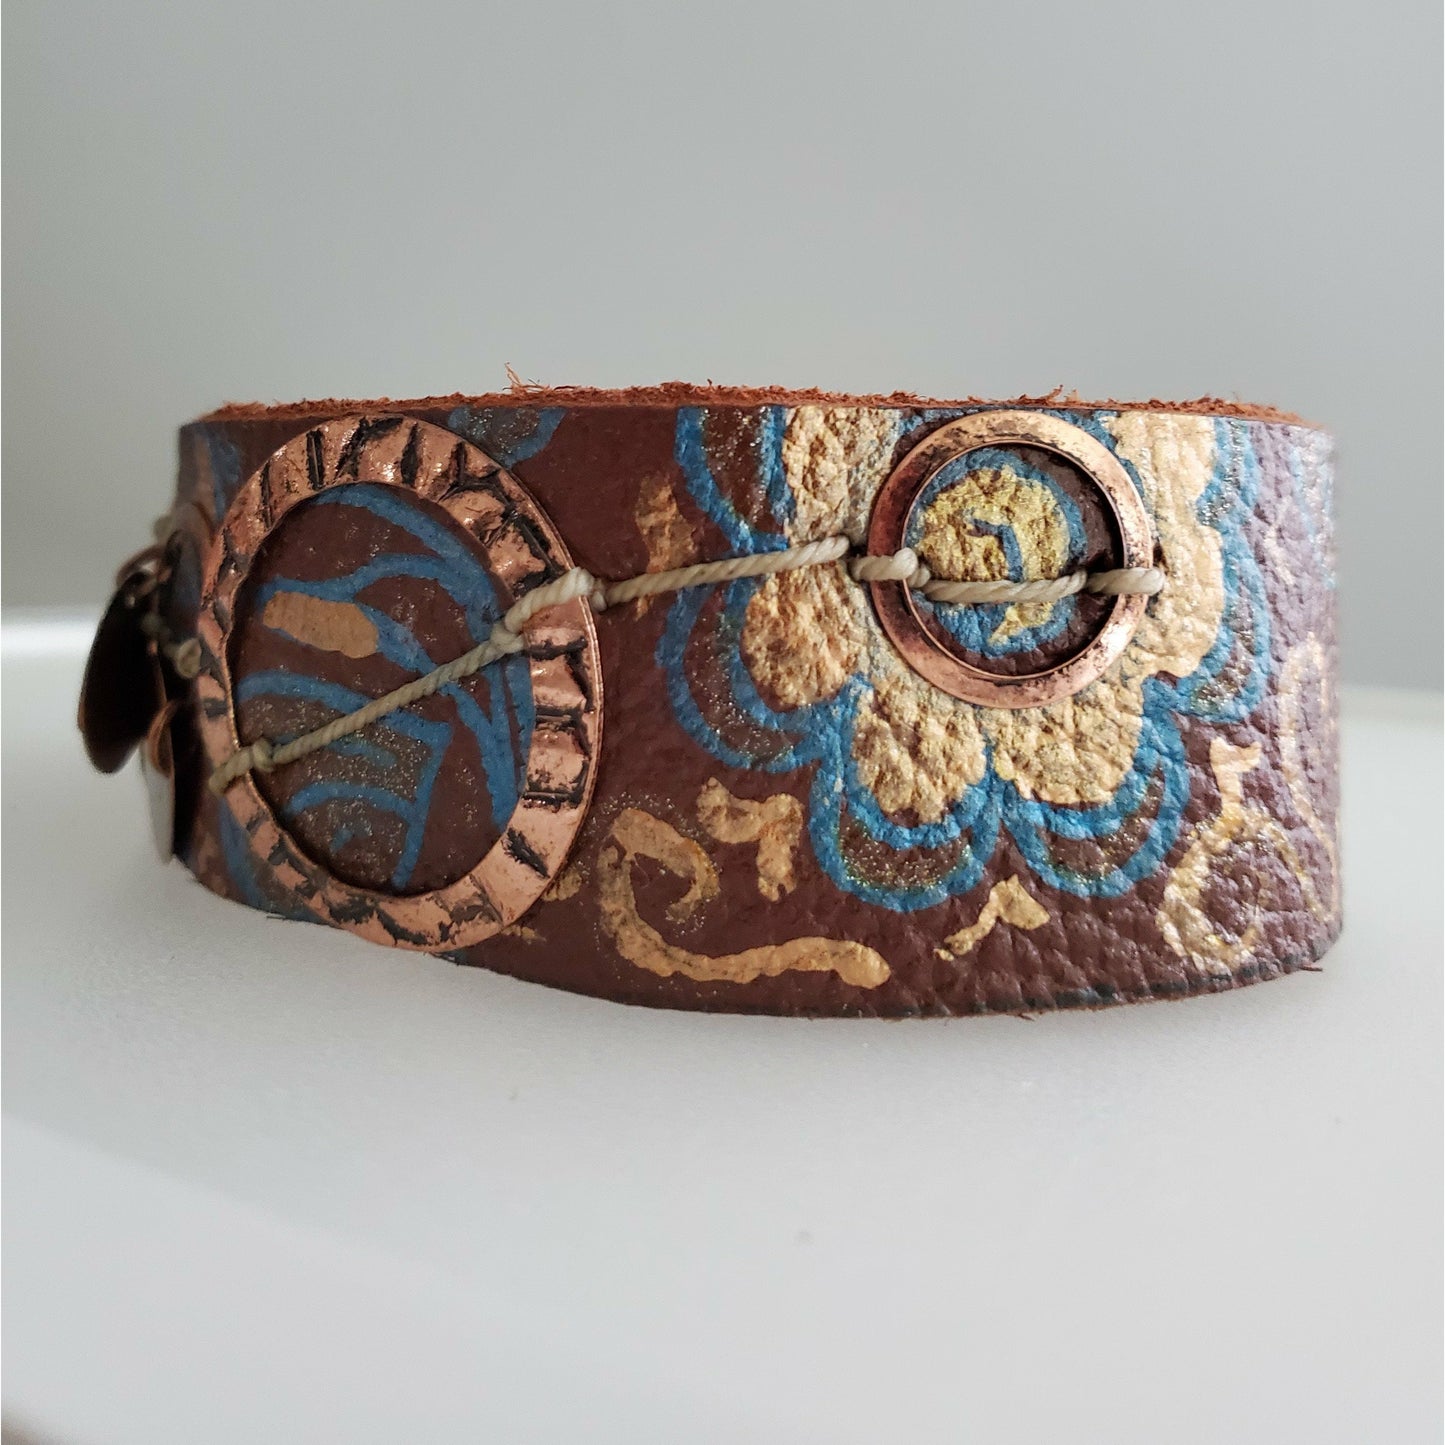 Hand Painted Leather Bracelet with Copper Rings